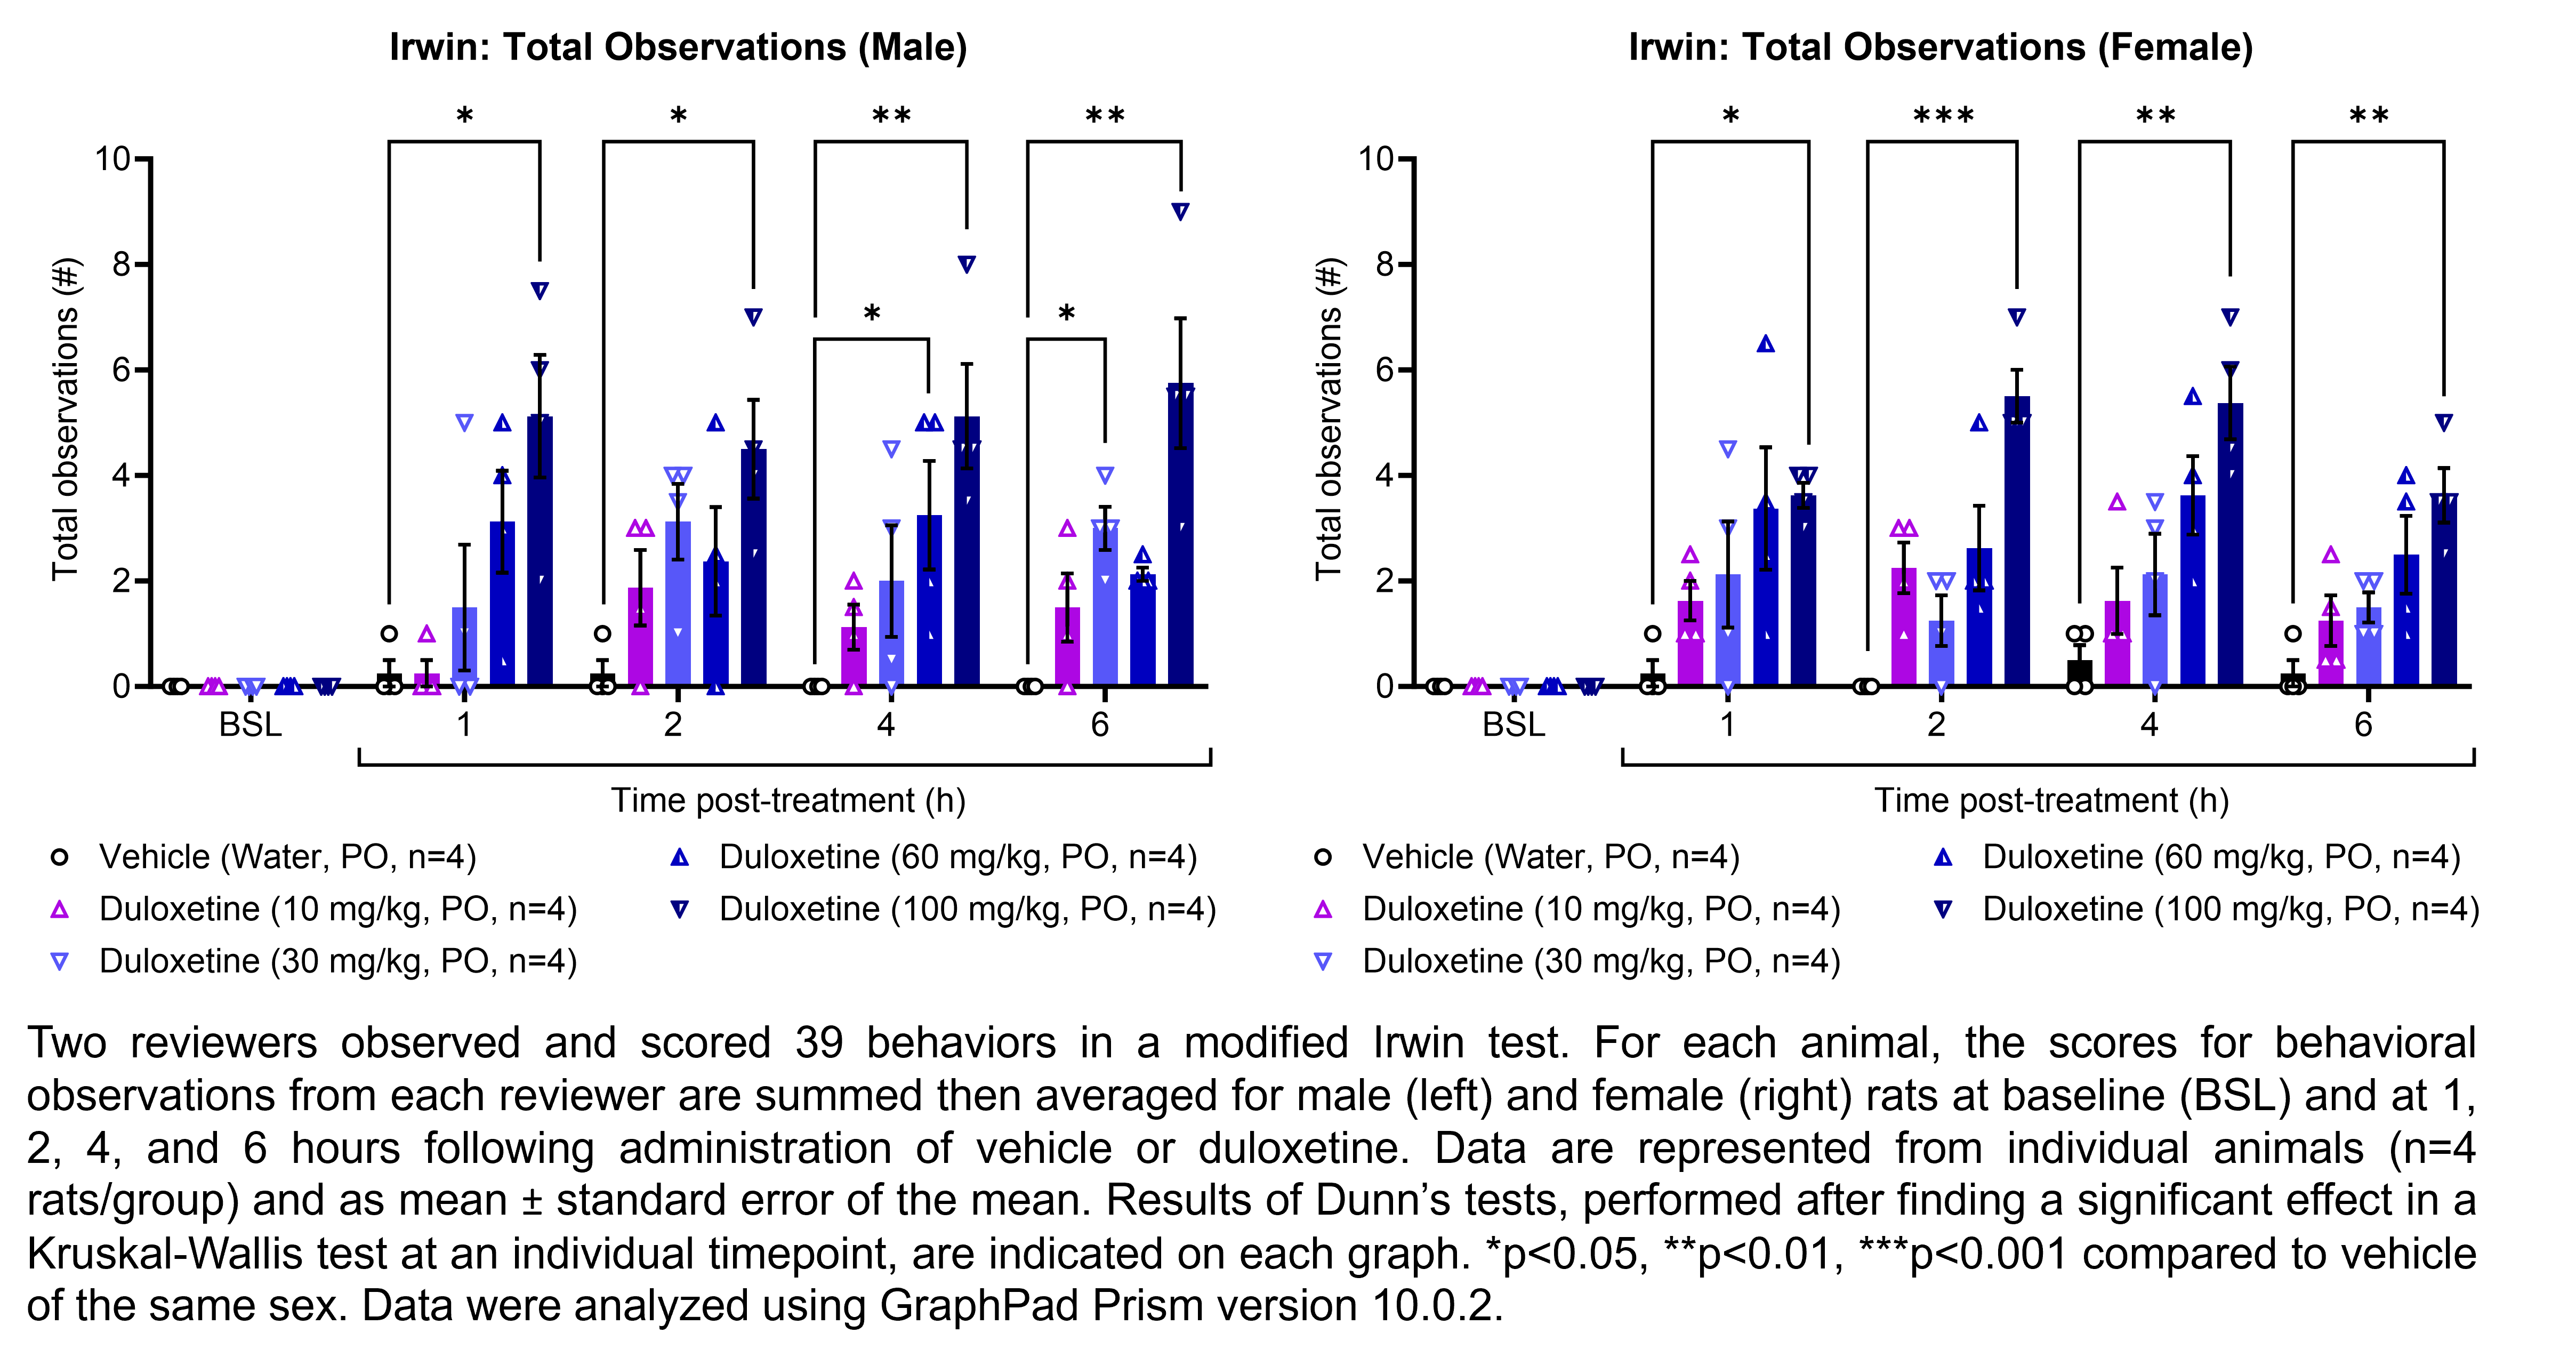 Two reviewers observed and scored 39 behaviors in a modified Irwin test. For each animal, the scores for behavioral observations from each reviewer are summed then averaged for male and female rats (shown on two graphs). Responses are shown at the following time points: baseline (before treatment) and at 1, 2, 4, and 6 hours after treatment with vehicle (water, delivered PO) or duloxetine (10, 30, 60, or 100 mg/kg, delivered PO). There were 4 rats per group. Kruskal-Wallis tests were performed at each timepoint for each sex, followed by Dunn’s tests when a significant effect was observed. Dunn’s tests found an increase in the number of observations relative to vehicle in males at 1 hour post-treatment with 100 mg/kg duloxetine (p<0.05), at 2 hours post-treatment with 100 mg/kg duloxetine (p<0.05), at 4 hours post-treatment with 60 mg/kg duloxetine (p<0.05) and 100 mg/kg duloxetine (p<0.01), and at 6 hours post-treatment with 30 mg/kg duloxetine (p<0.05) and 100 mg/kg duloxetine (p<0.01). Dunn’s tests found an increase in the number of observations relative to vehicle in females at 1, 2, 4, and 6 hours post-treatment with 100 mg/kg duloxetine (p<0.05, 0.001, 0.01, 0.01, respectively). Data were analyzed using GraphPad Prism version 10.0.2